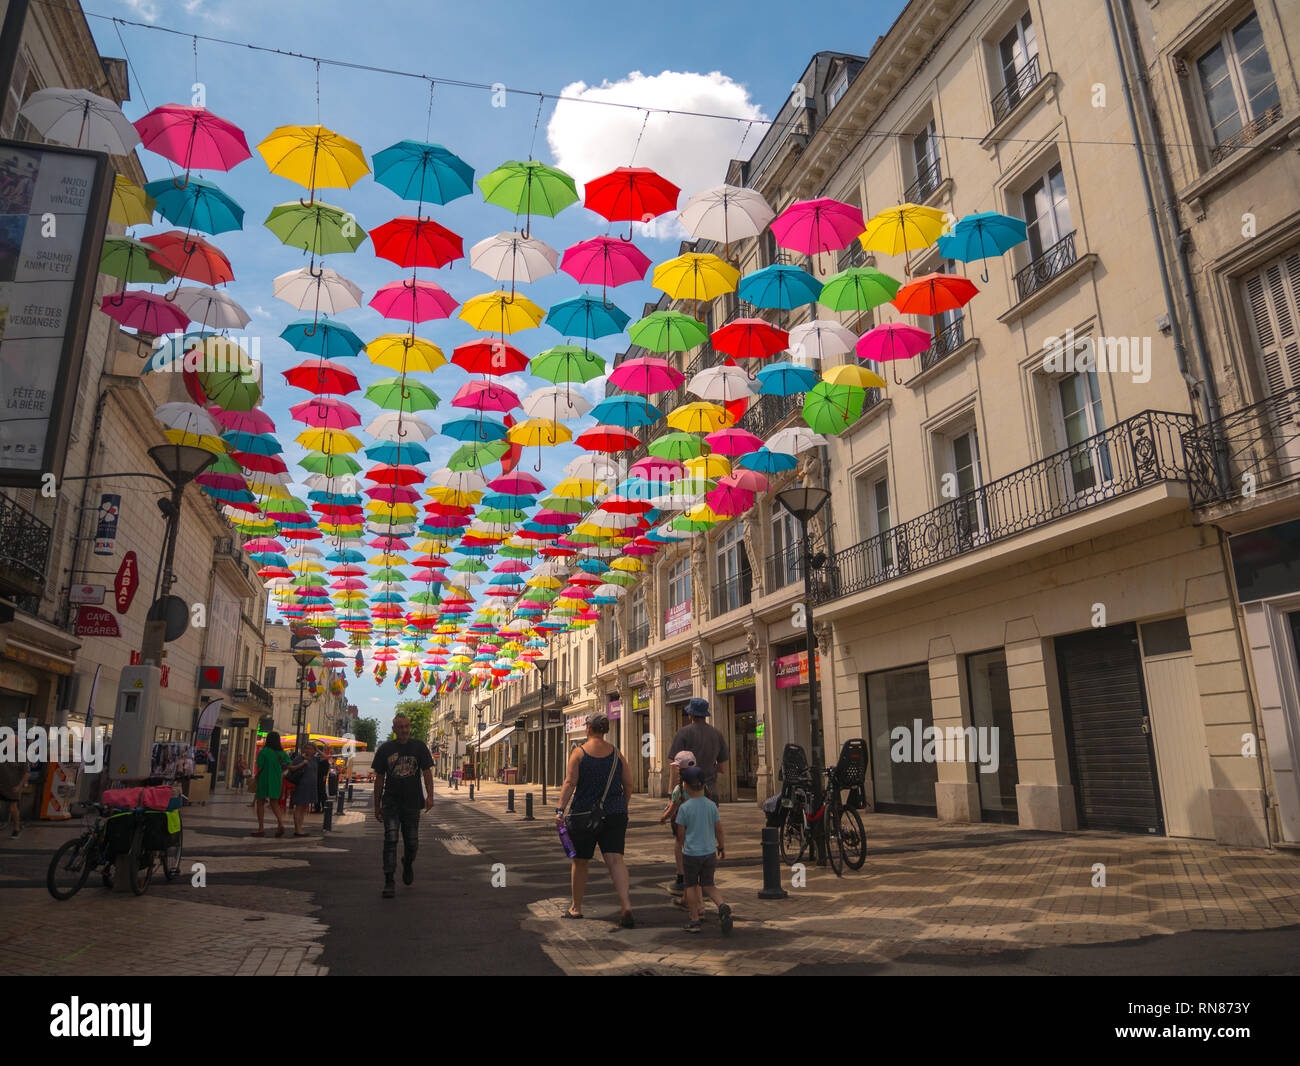 Rainbow/multi-coloured umbrellas hanging over a cobbled street in Saumur, Loire Valley, France. Stock Photo